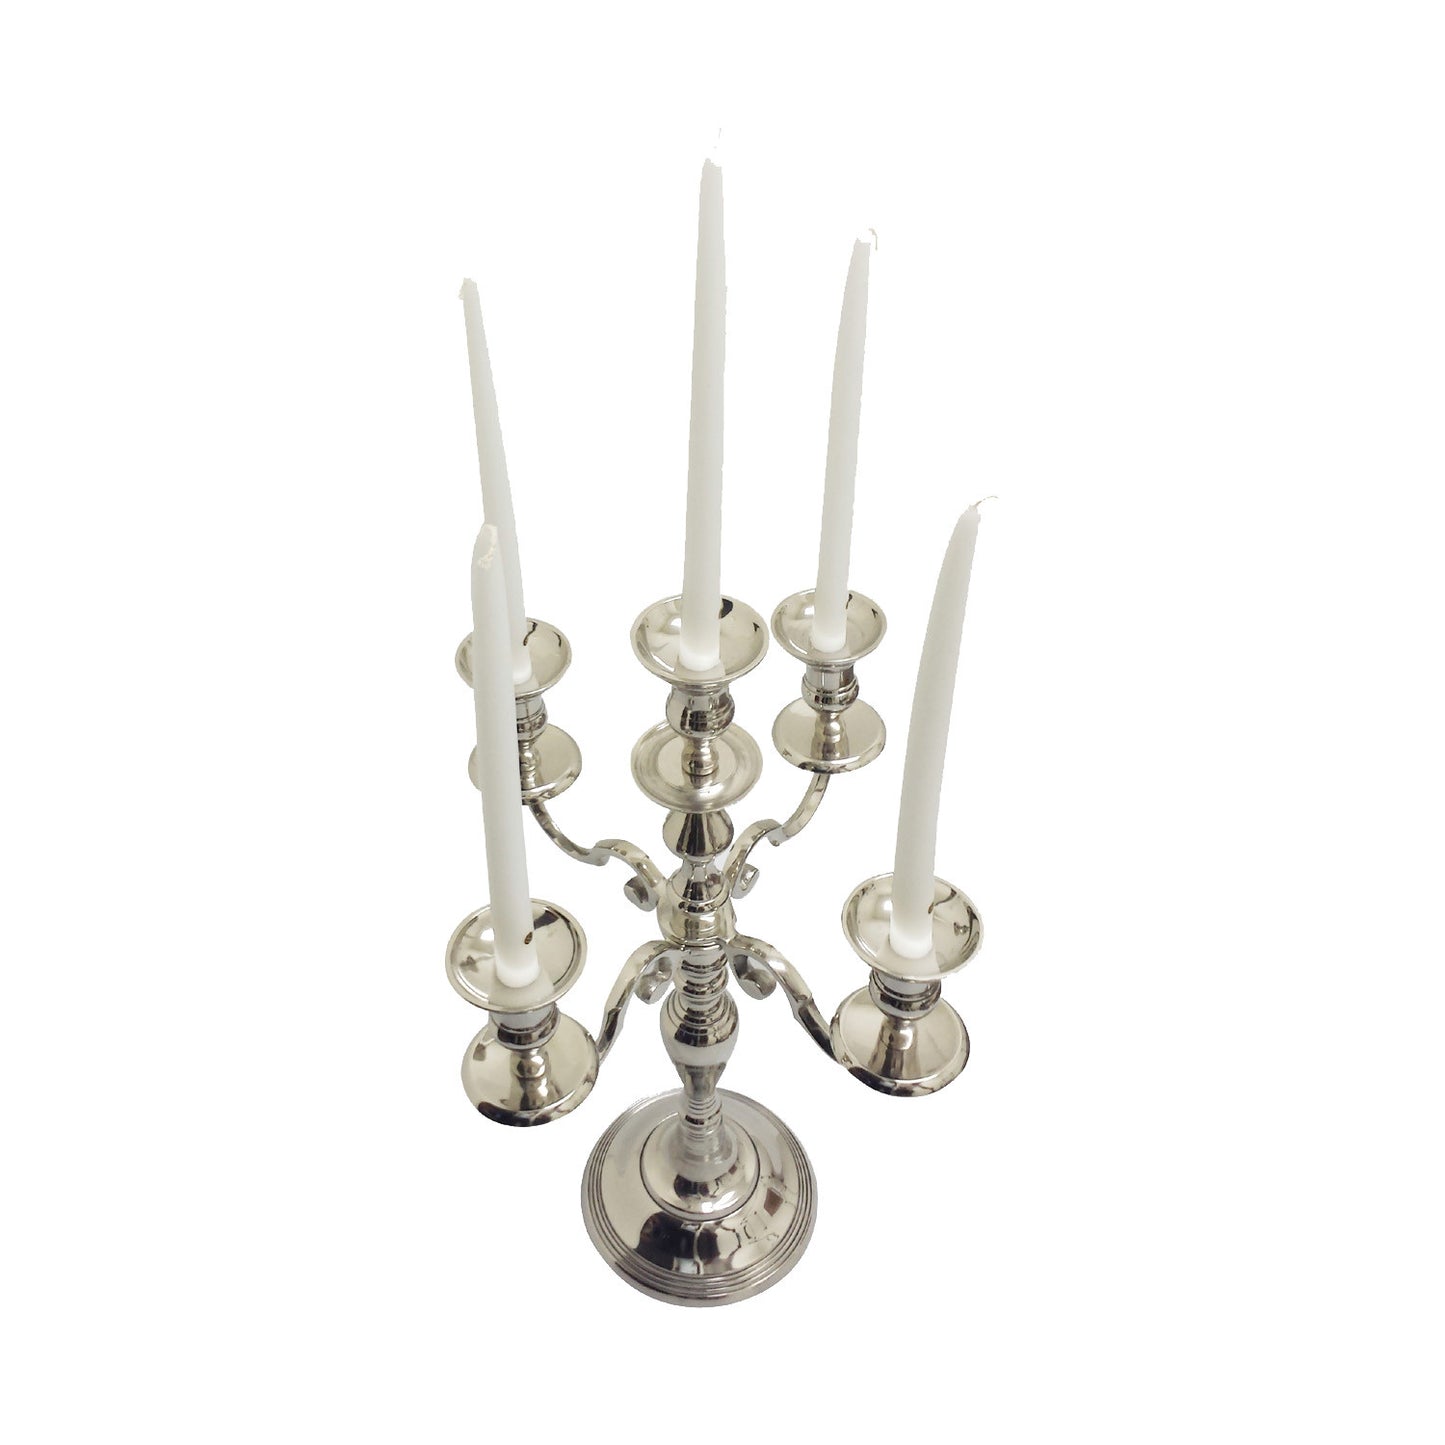 GiftBay 4003 Wedding Candelabra with 5 Candlestick Holders and 1 Flower Pot Plate Holders, Silver Nickle Plated, 24"H and 16"W